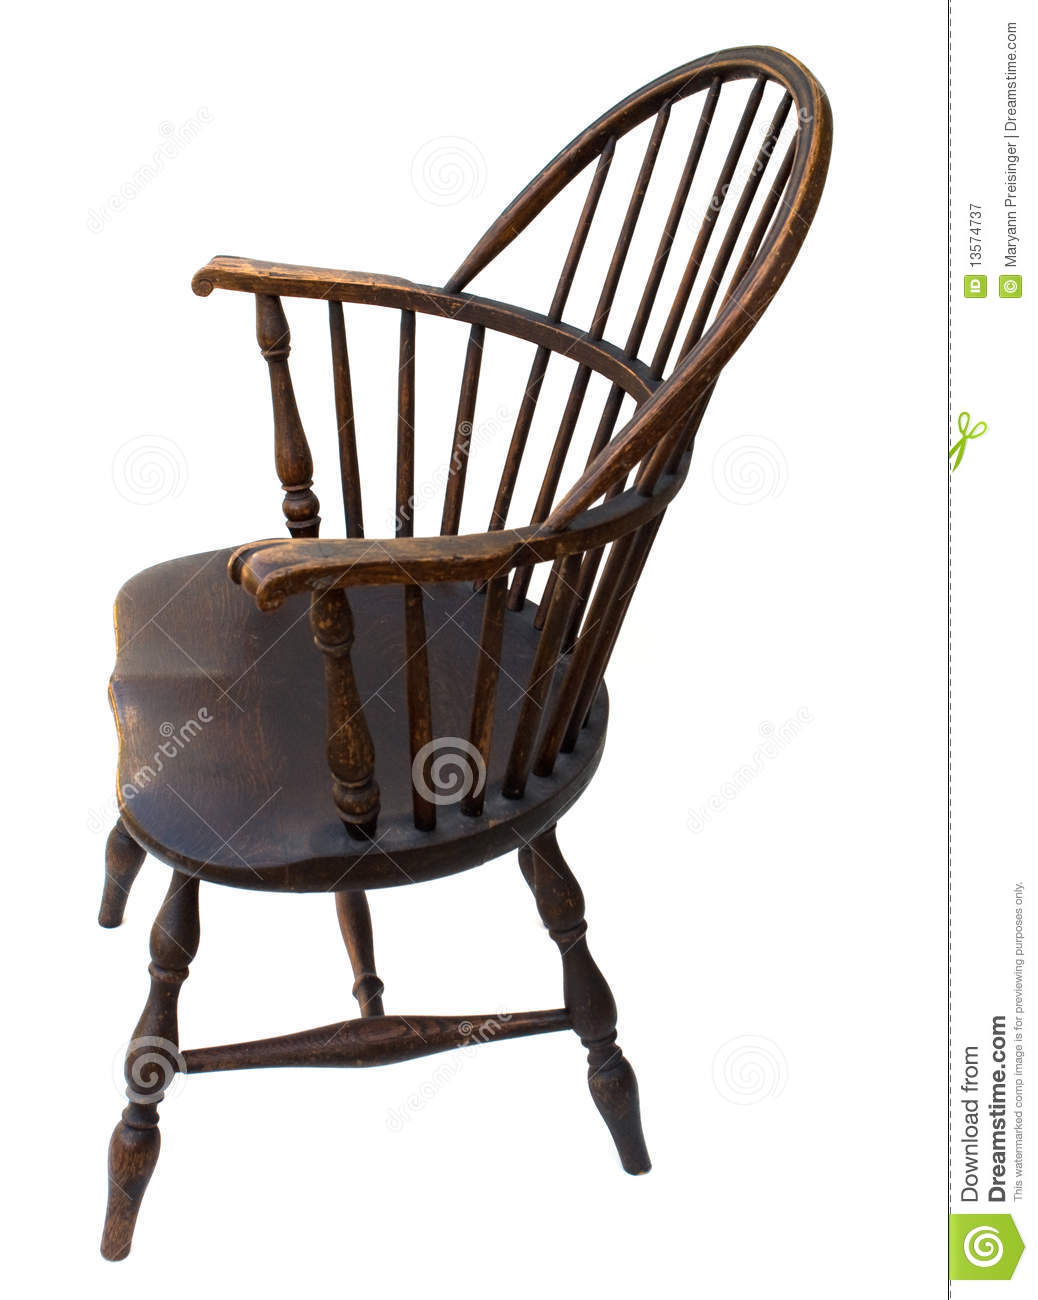 Antique Windsor Chair Side View Isolated Royalty Free Stock